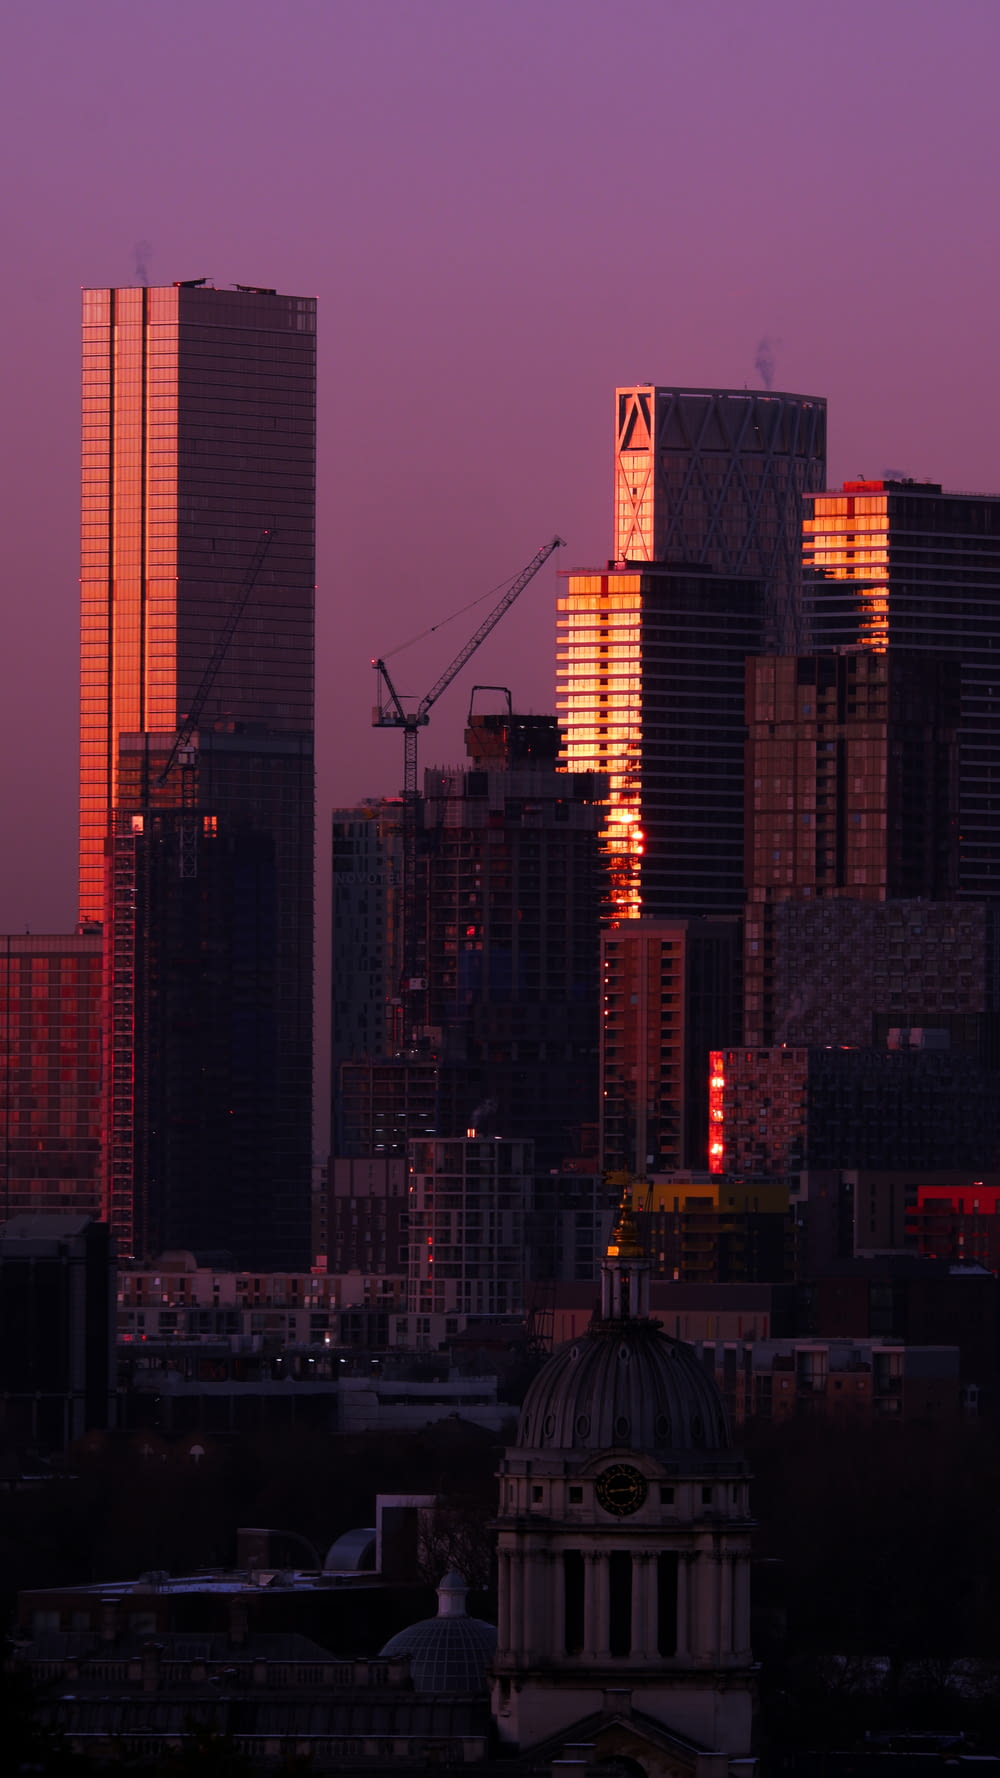 a city skyline with tall buildings and a crane in the background